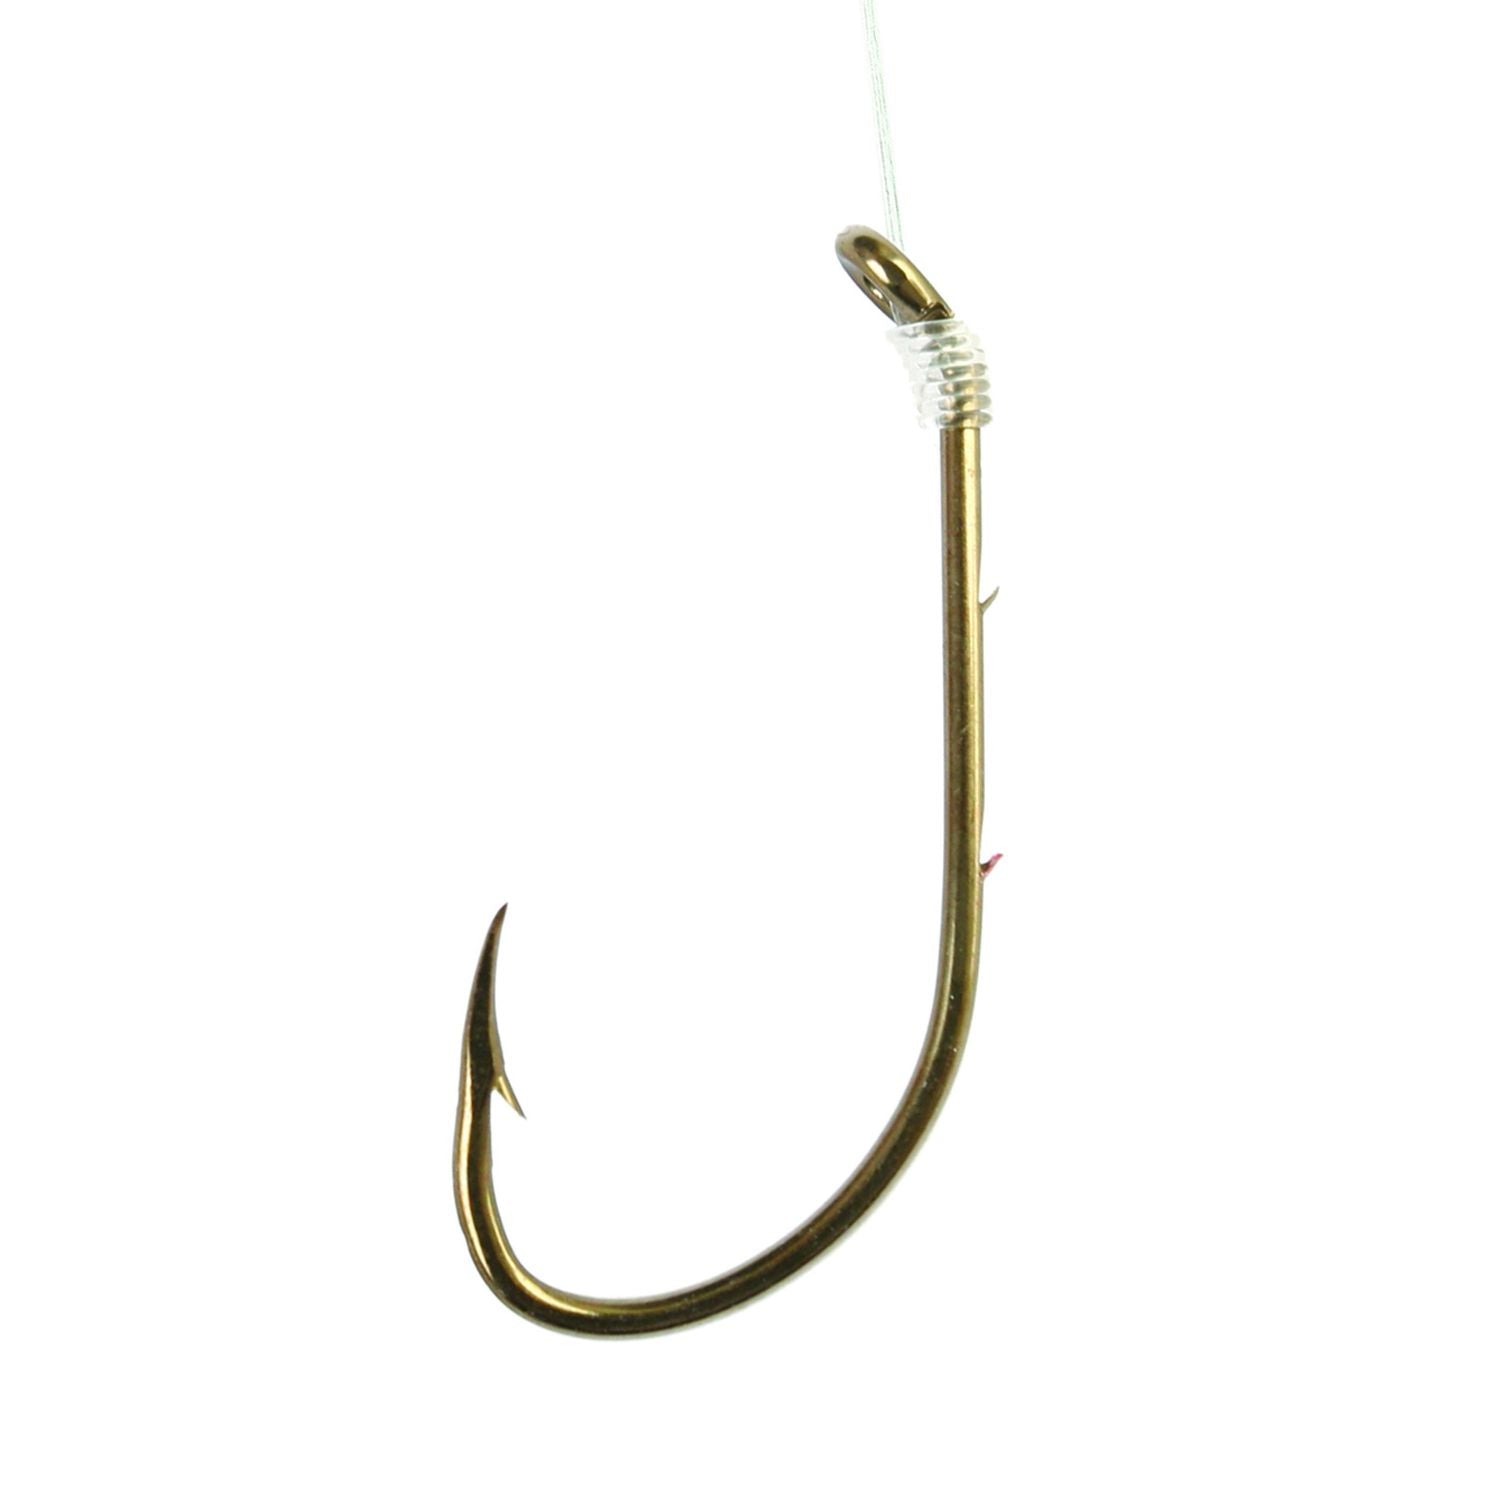 Saltwater Freshwater Surf fishing rigs with Snelled Hooks and